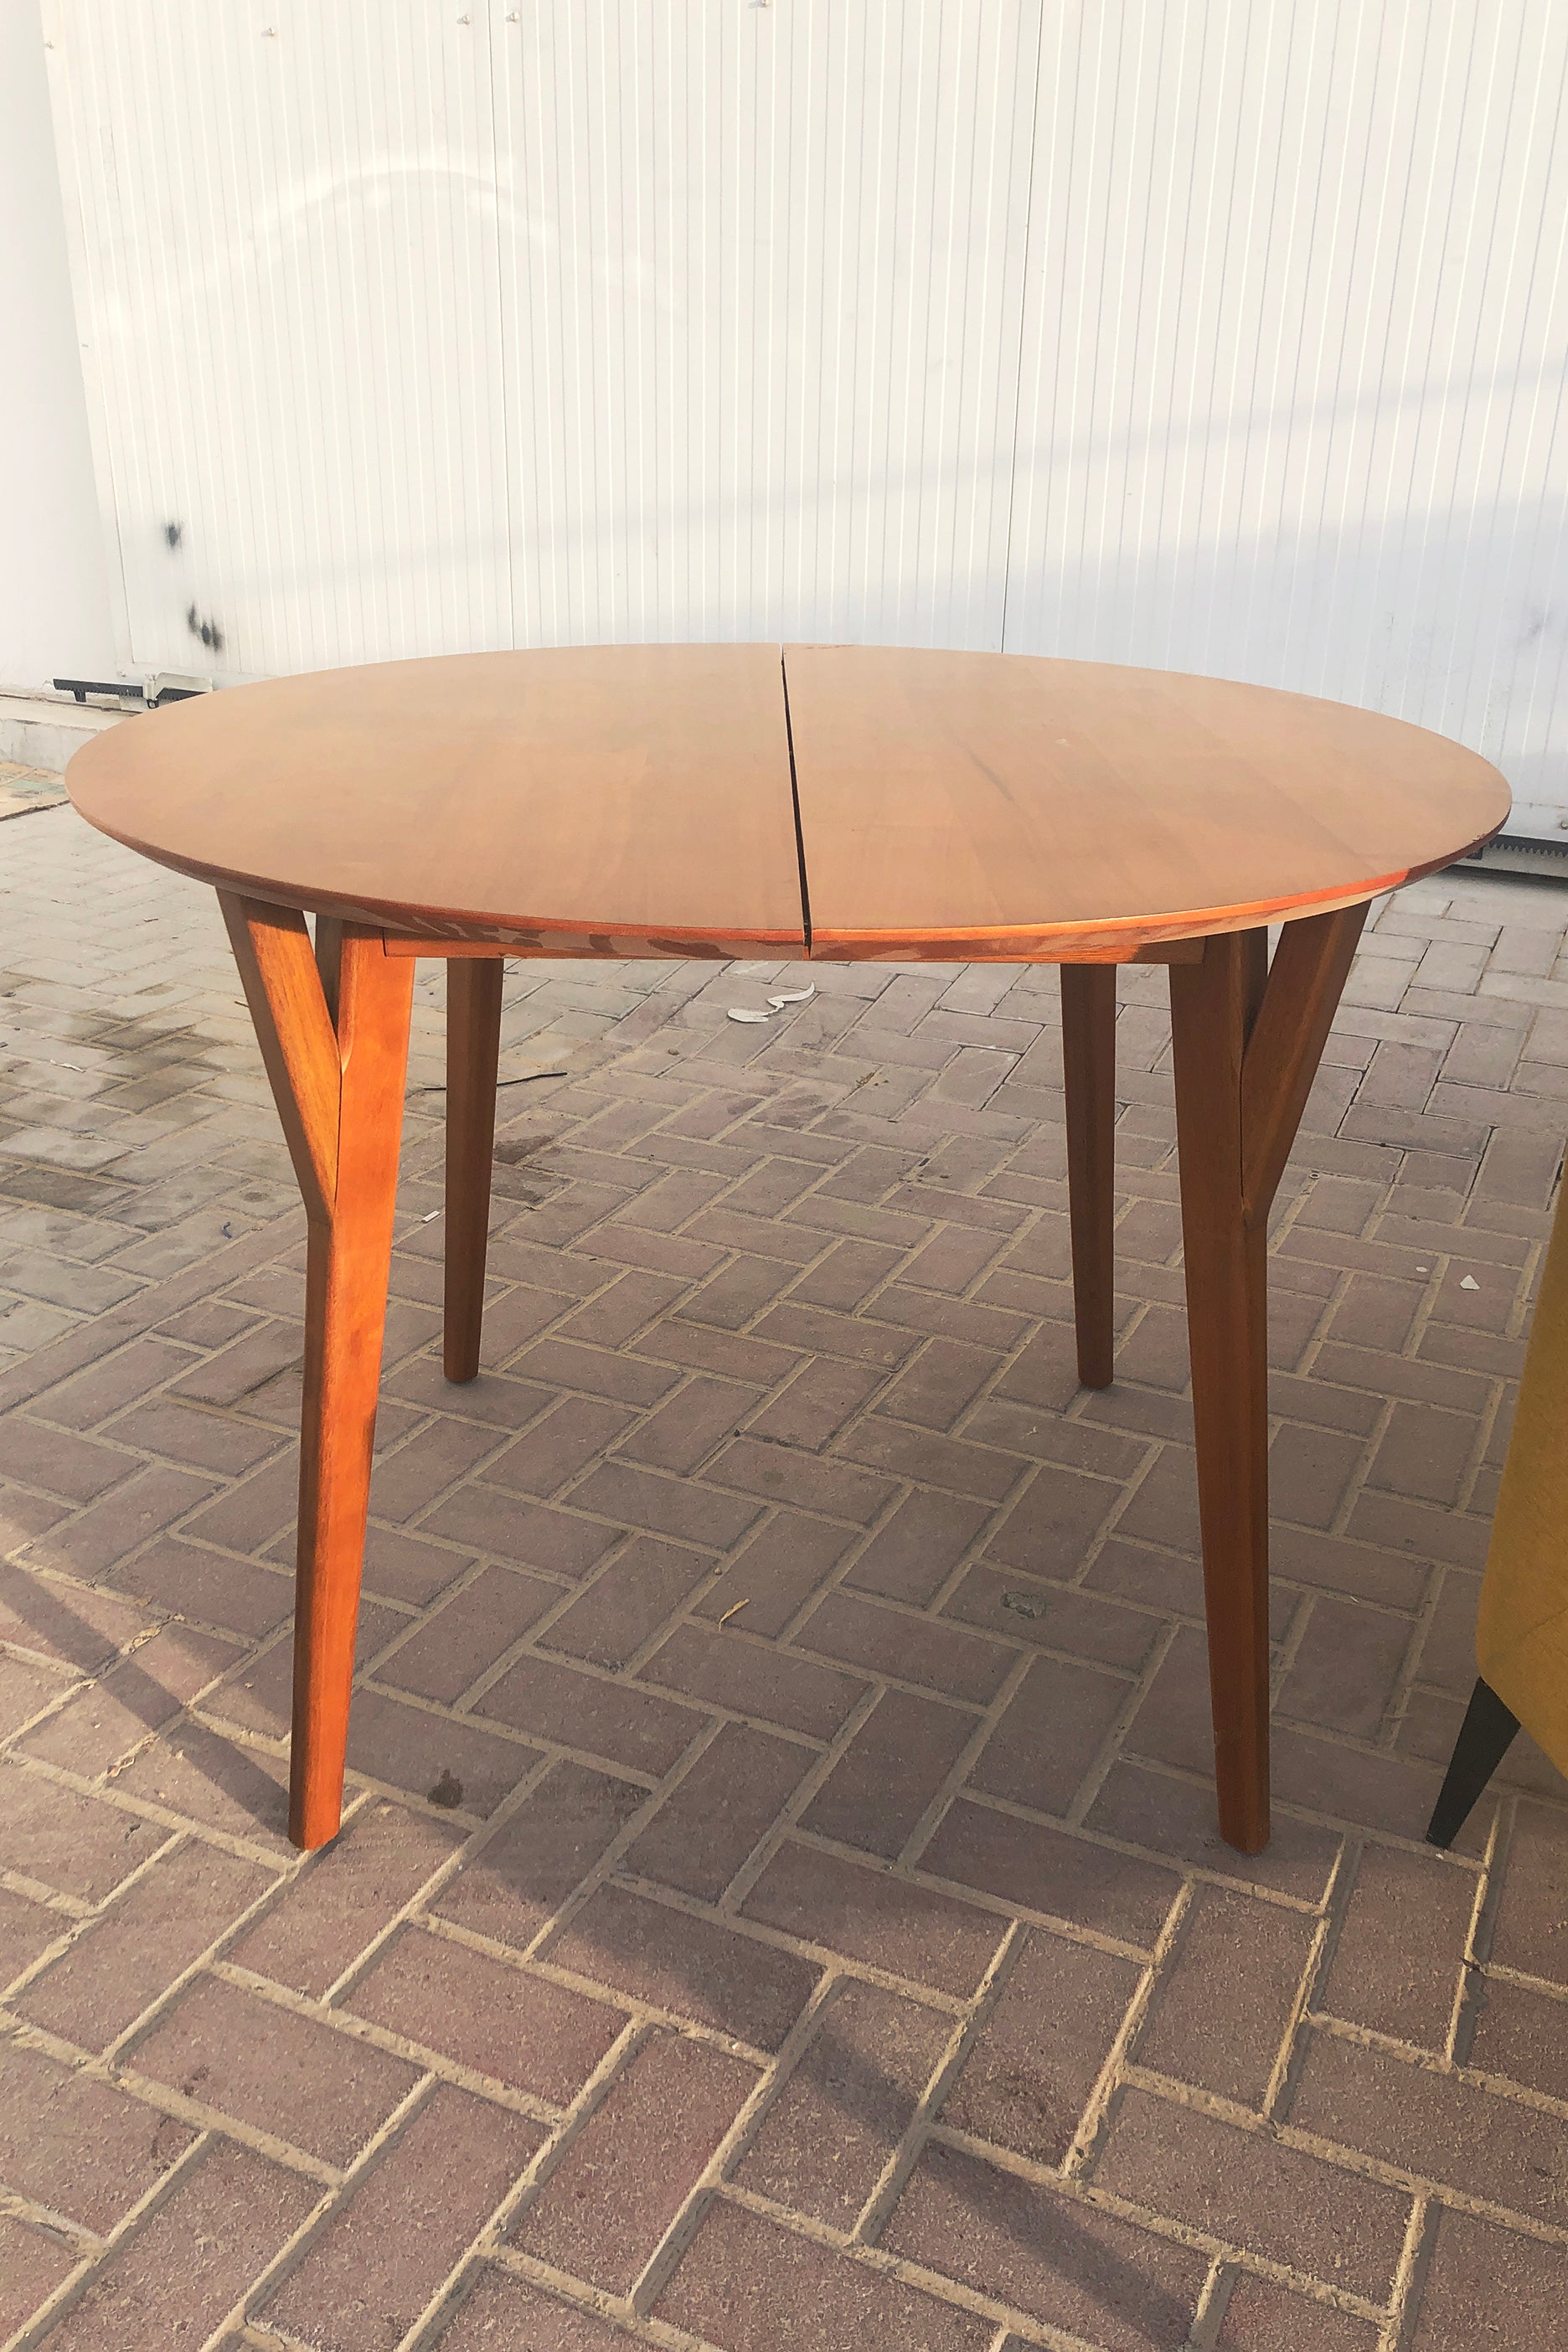 4-seater wooden DINING TABLE